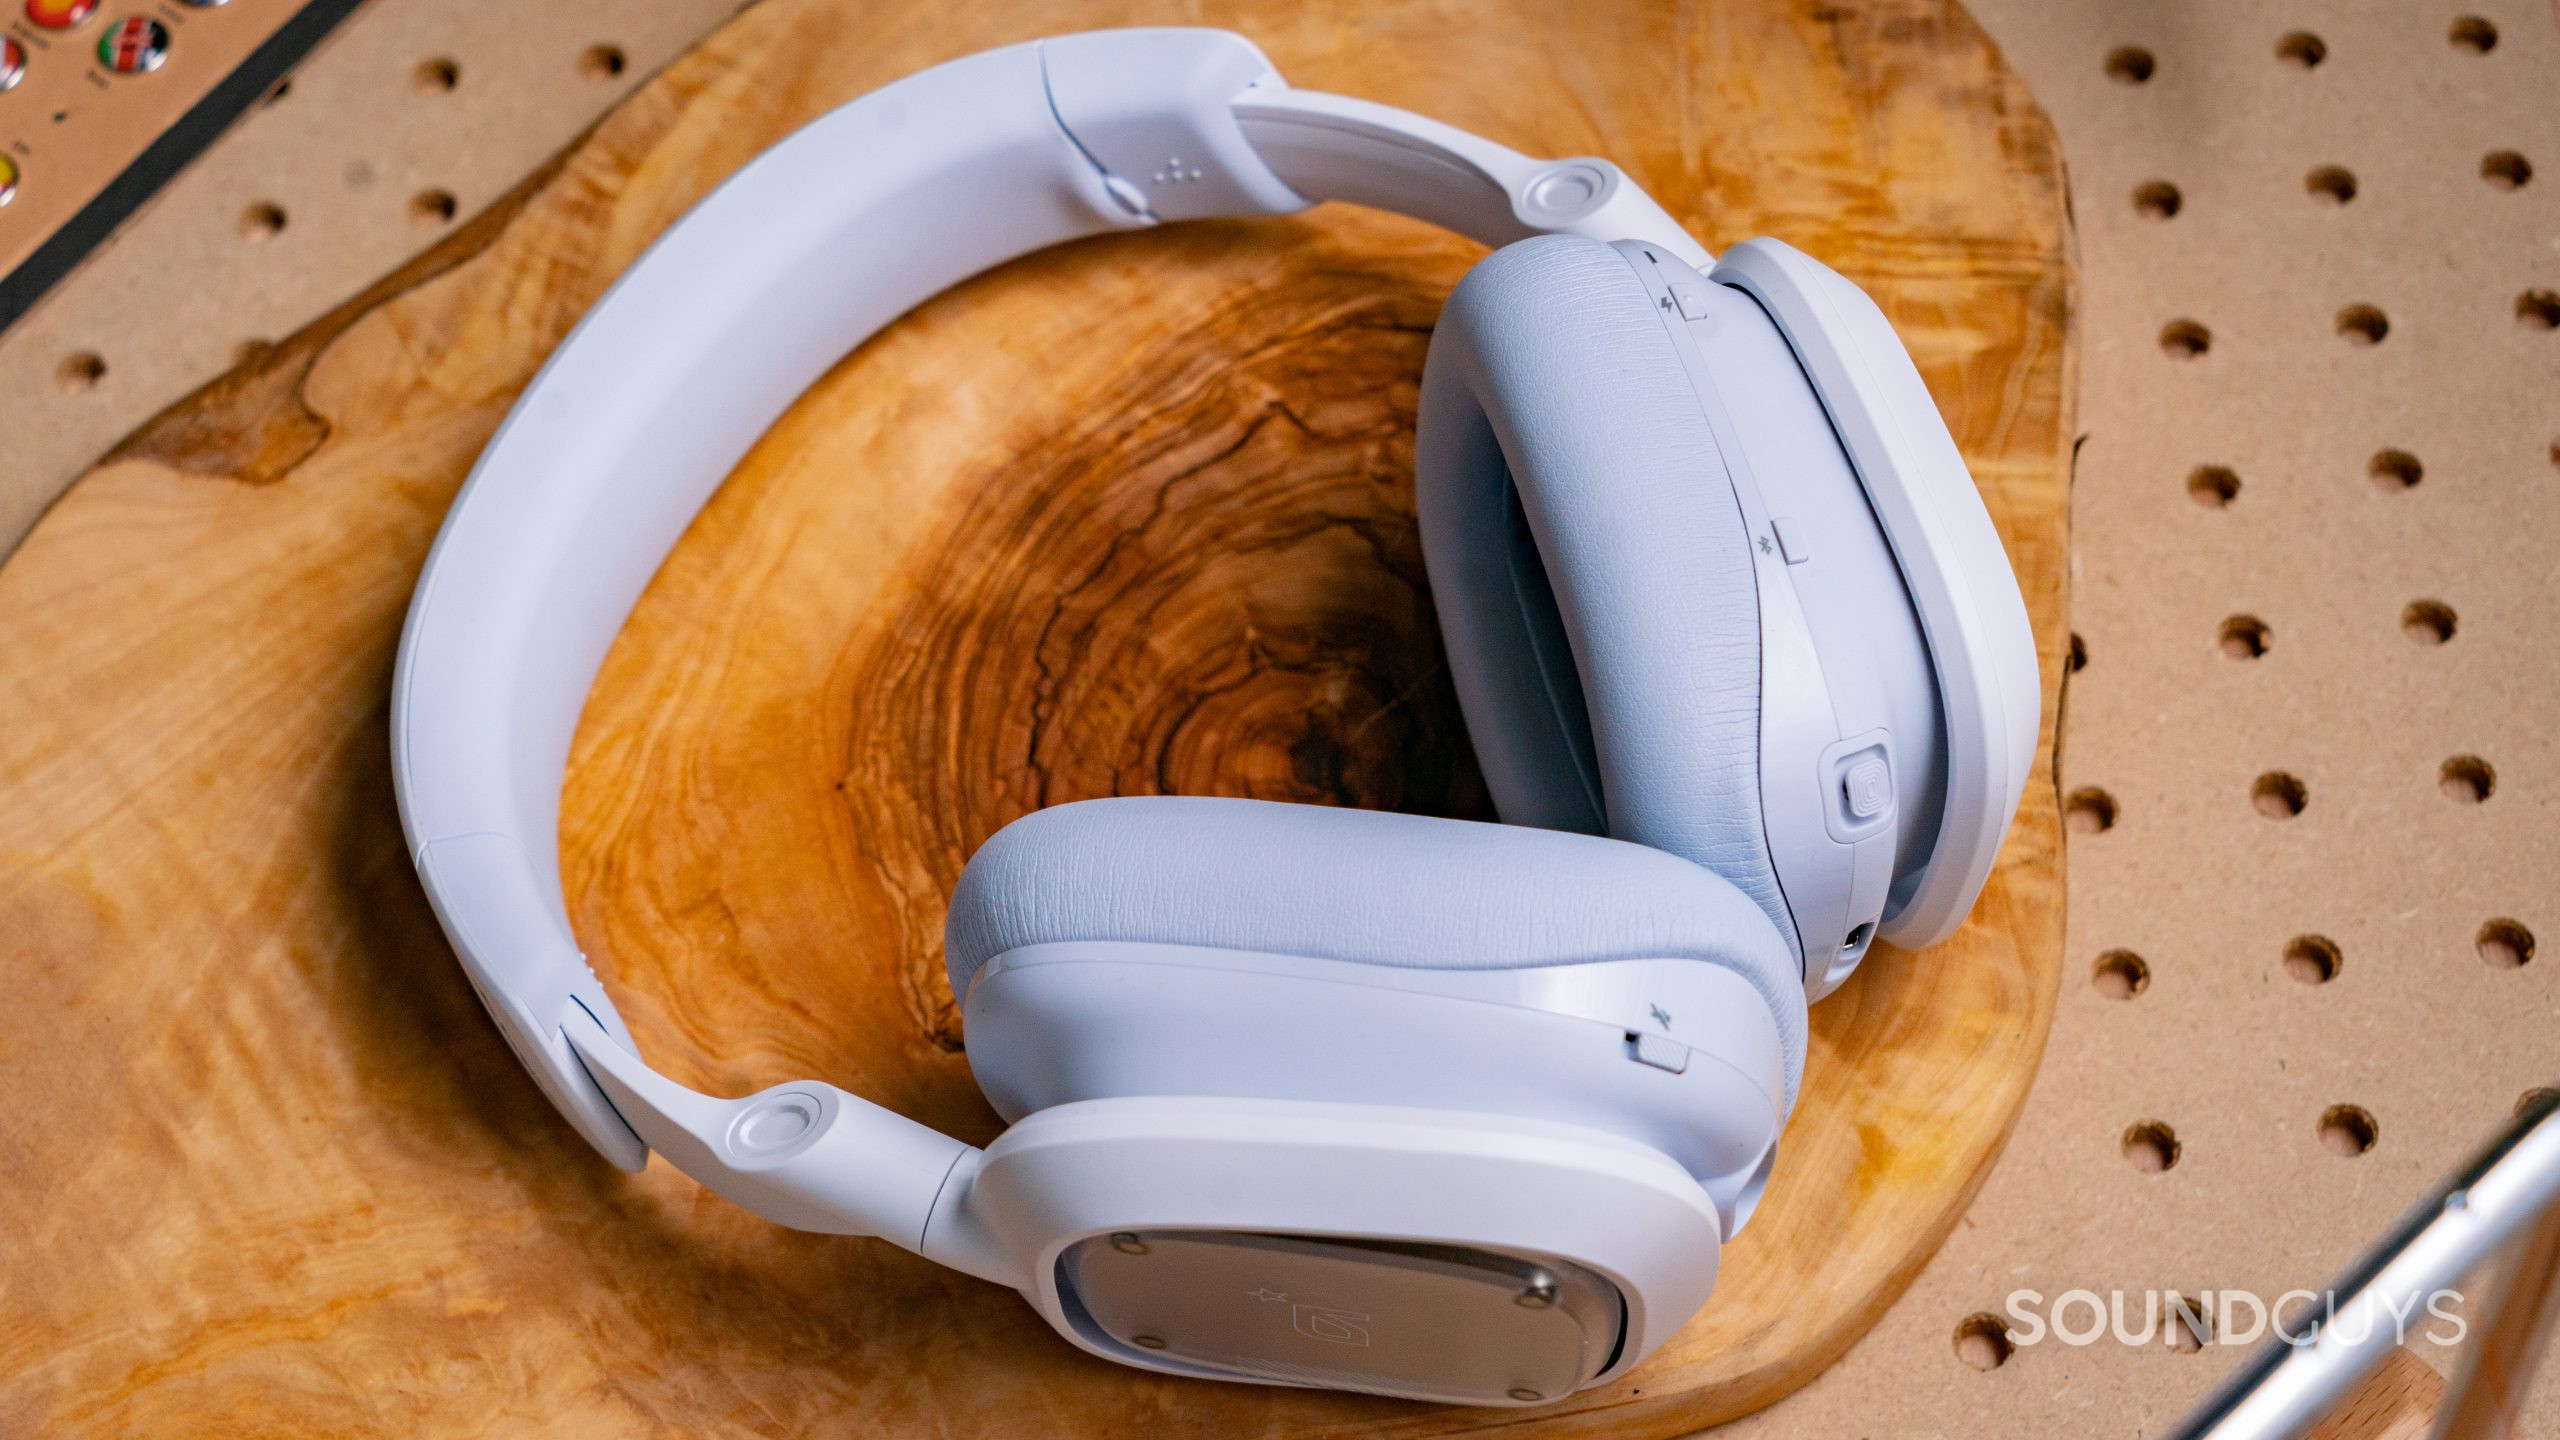 The Astro A30 gaming headset laying on a wooden surface, showing the mute button on the left ear cup, and the power button, Bluetooth button, and multifunction rocker on the right ear cup.